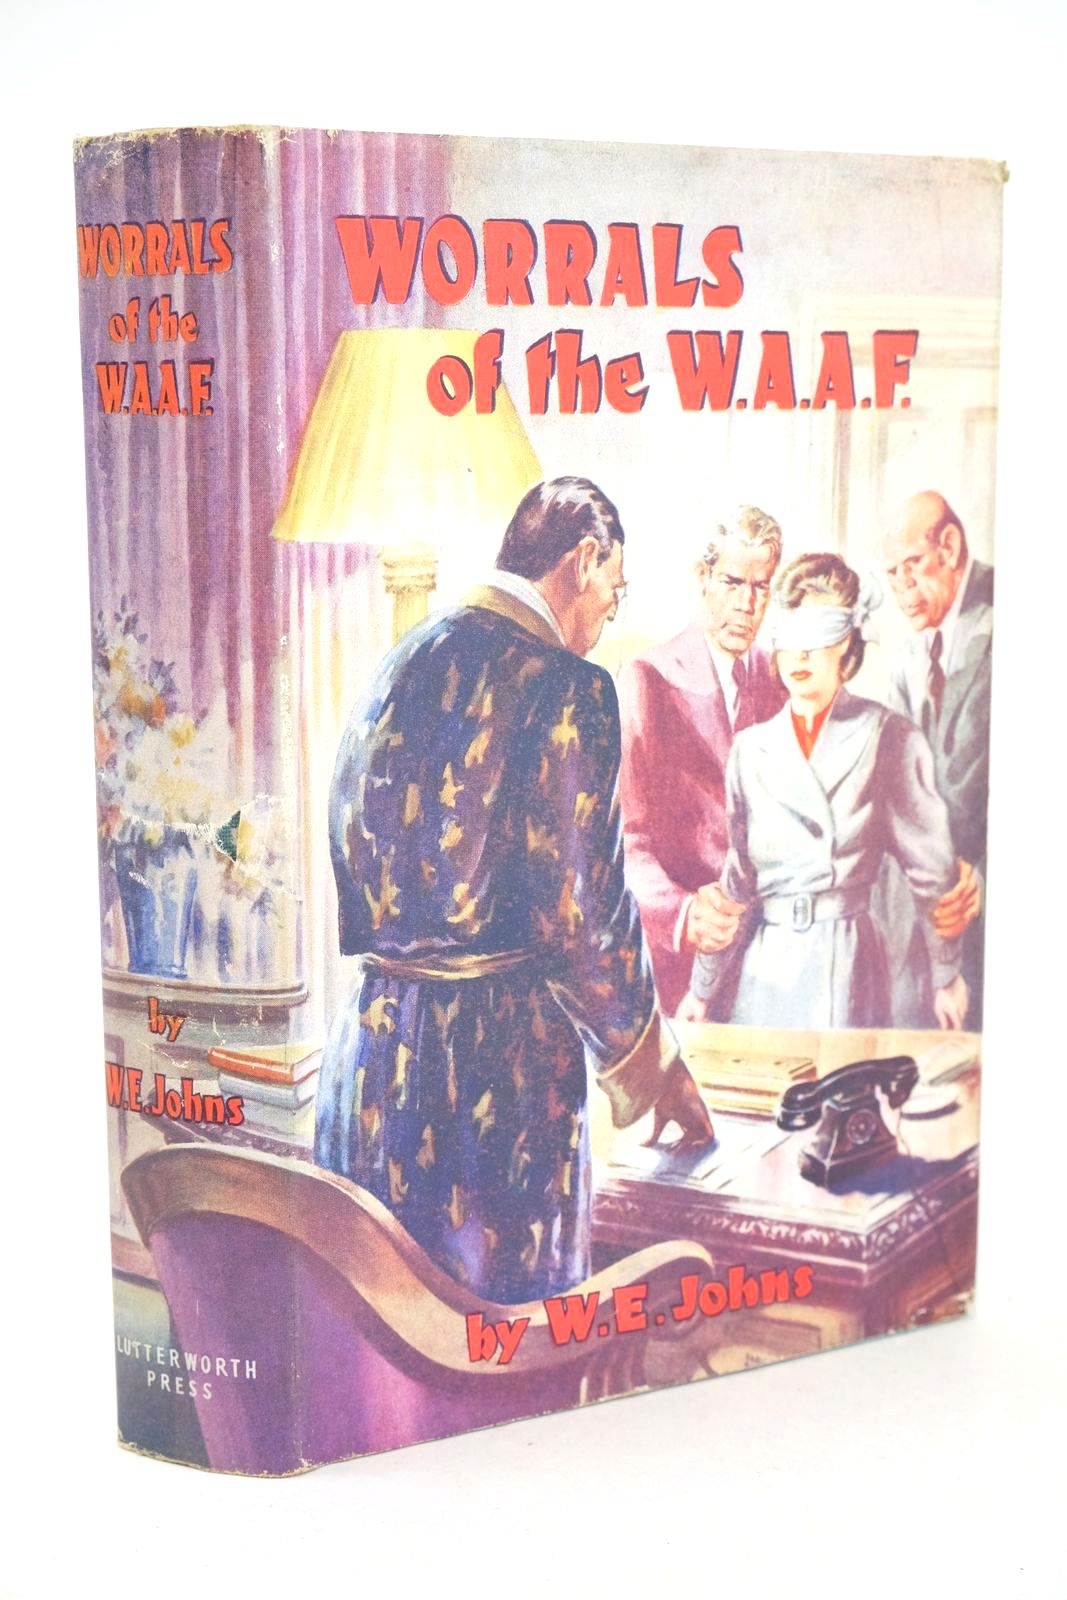 Photo of WORRALS OF THE W.A.A.F. written by Johns, W.E. published by Lutterworth Press (STOCK CODE: 1326038)  for sale by Stella & Rose's Books